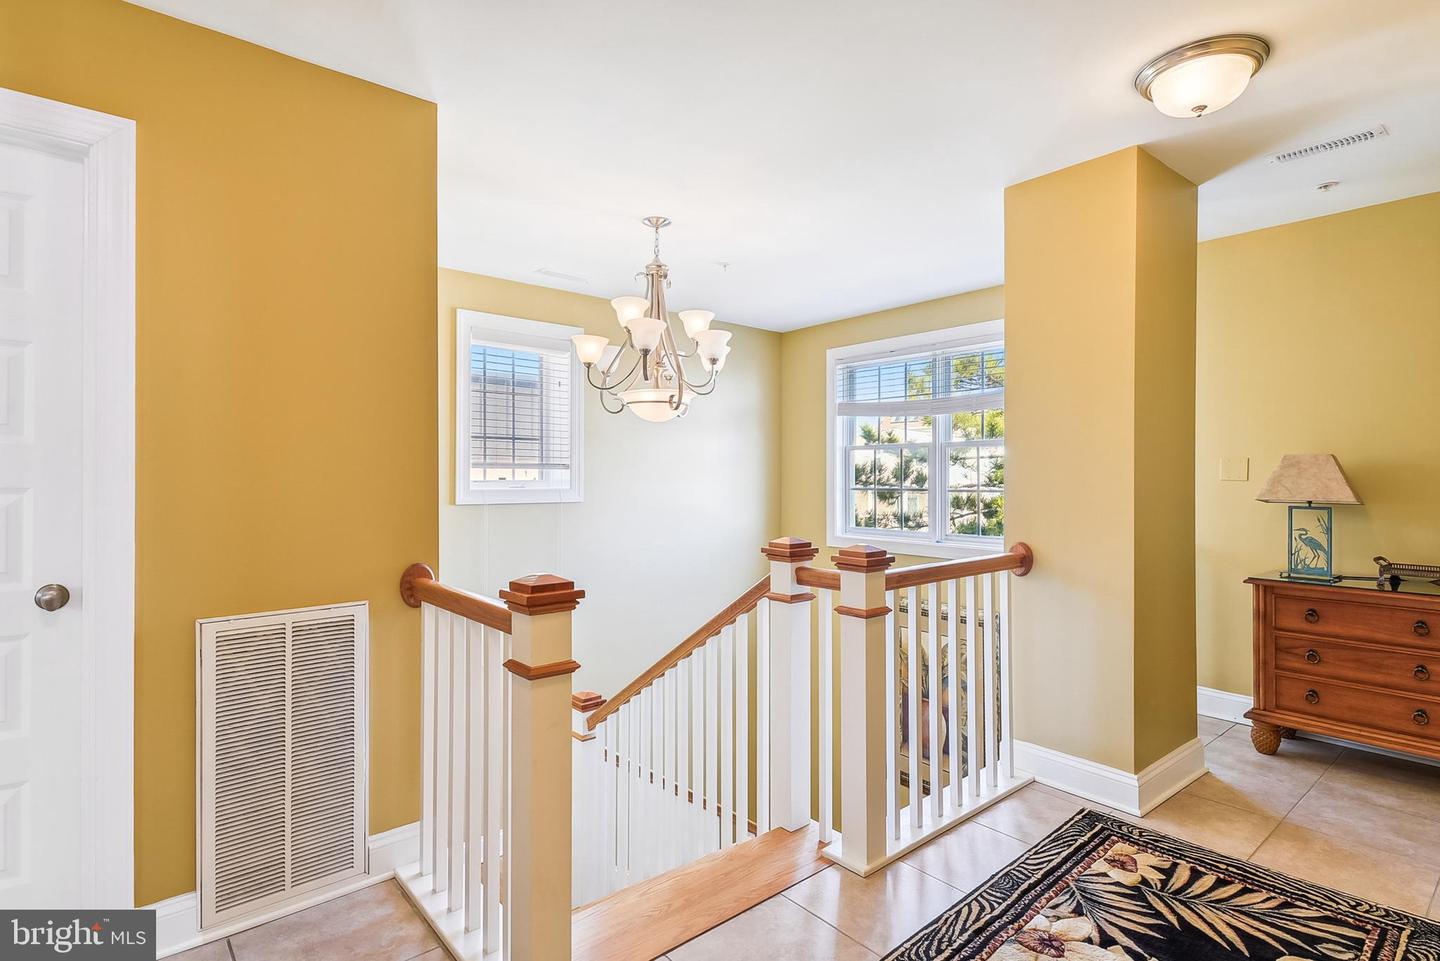 MDWO2019340-802917093926-2024-03-12-11-41-07 14301 Wight St #201 | Ocean City, MD Real Estate For Sale | MLS# Mdwo2019340  - 1st Choice Properties